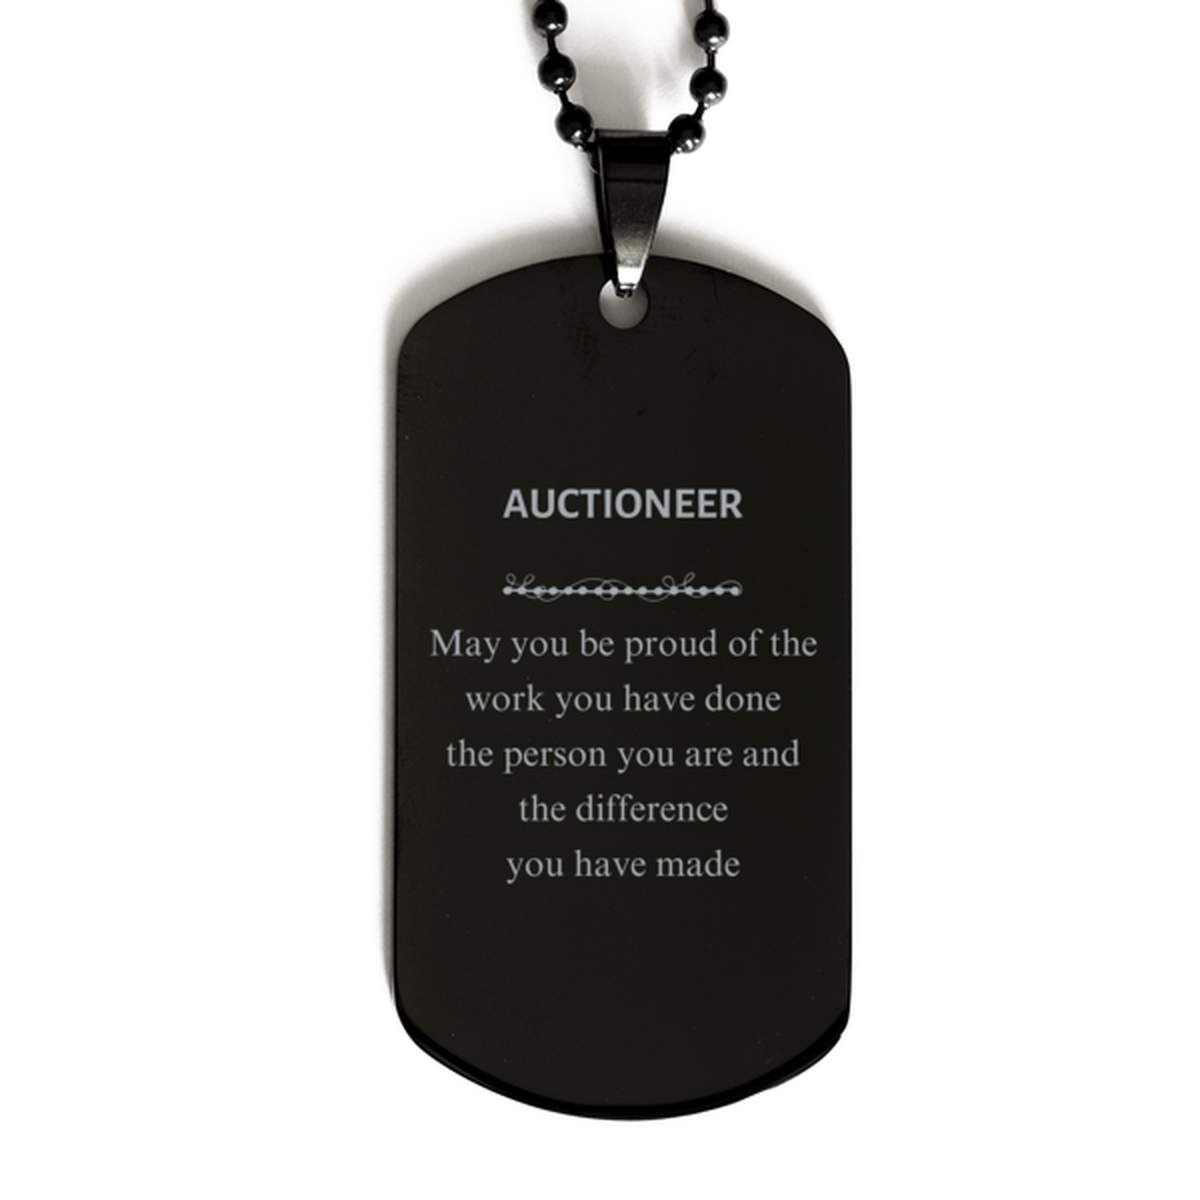 Auctioneer May you be proud of the work you have done, Retirement Auctioneer Black Dog Tag for Colleague Appreciation Gifts Amazing for Auctioneer